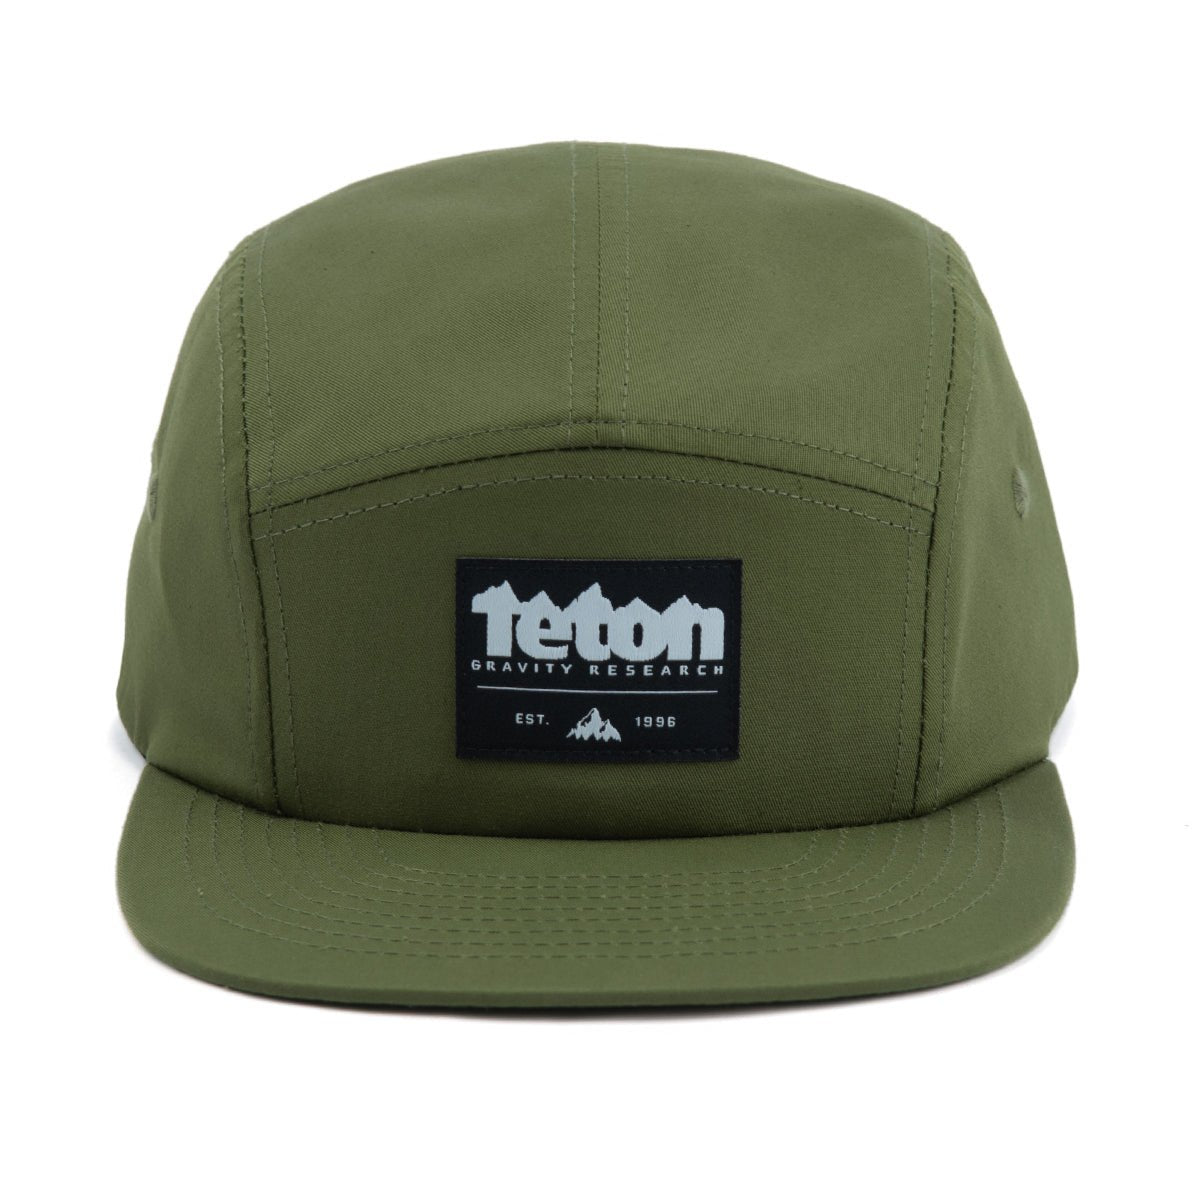 Twill 5 Panel Camper Hat - Teton Gravity Research #color_green